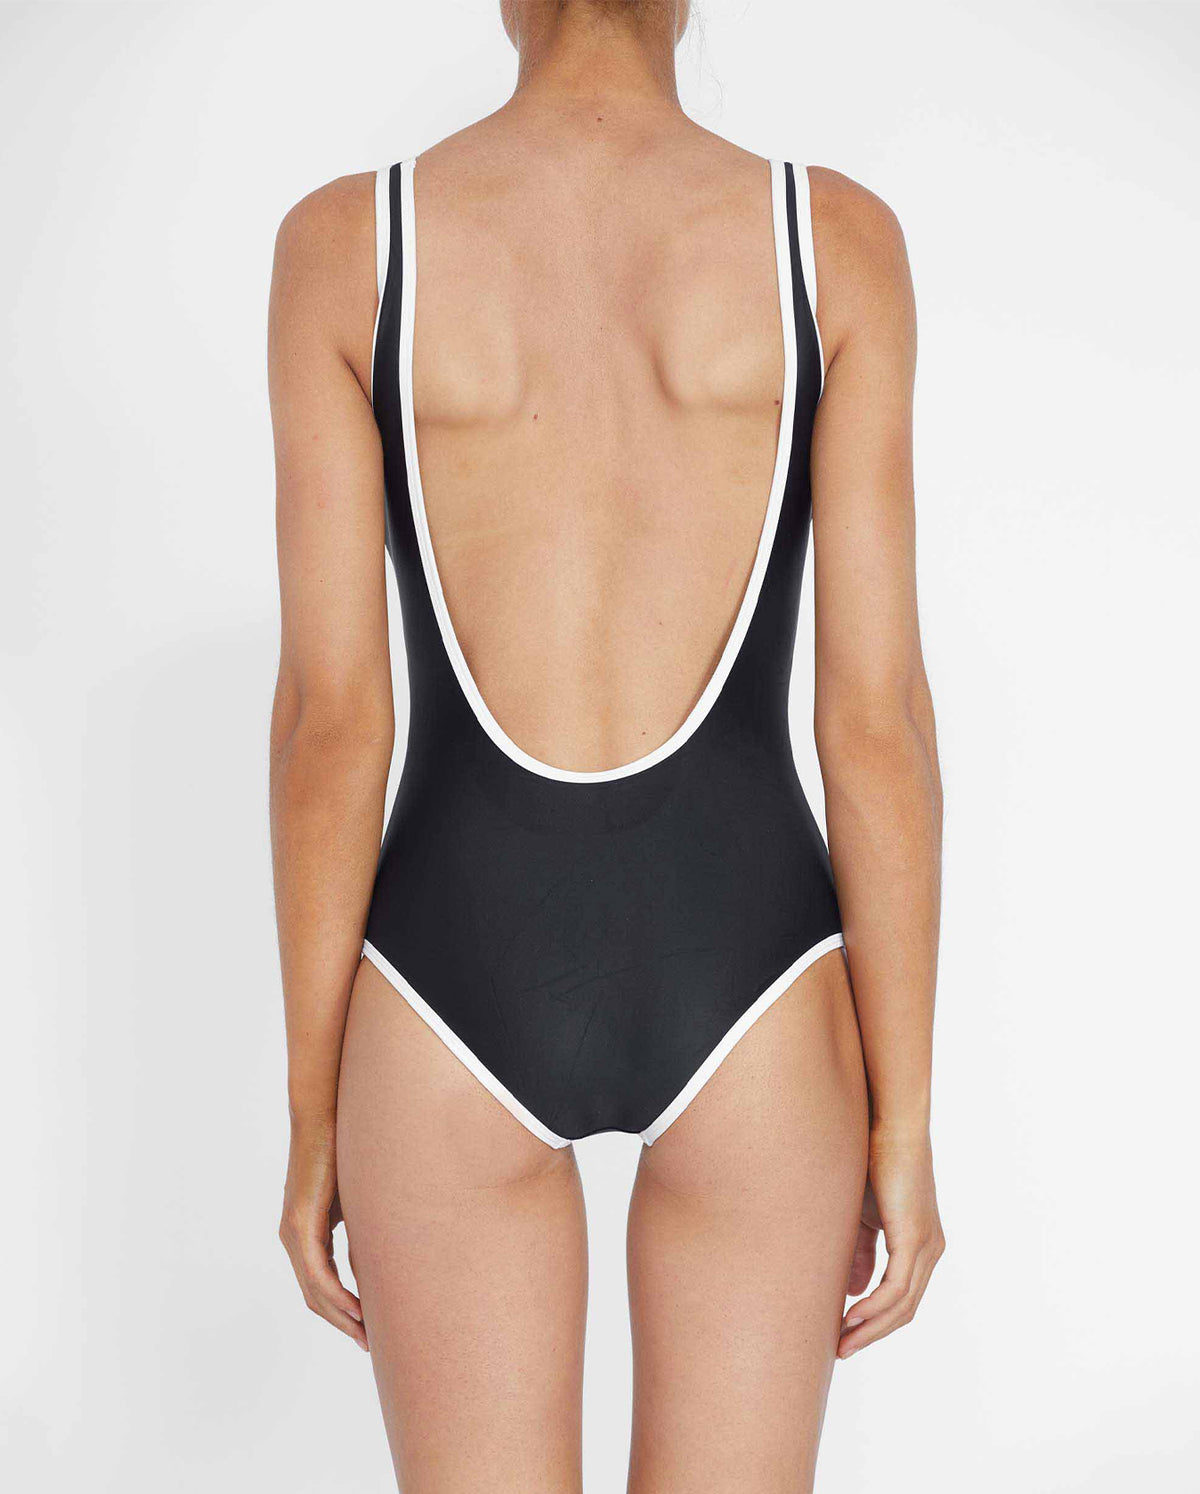 Backless Duo One Piece - Black & White Contrast